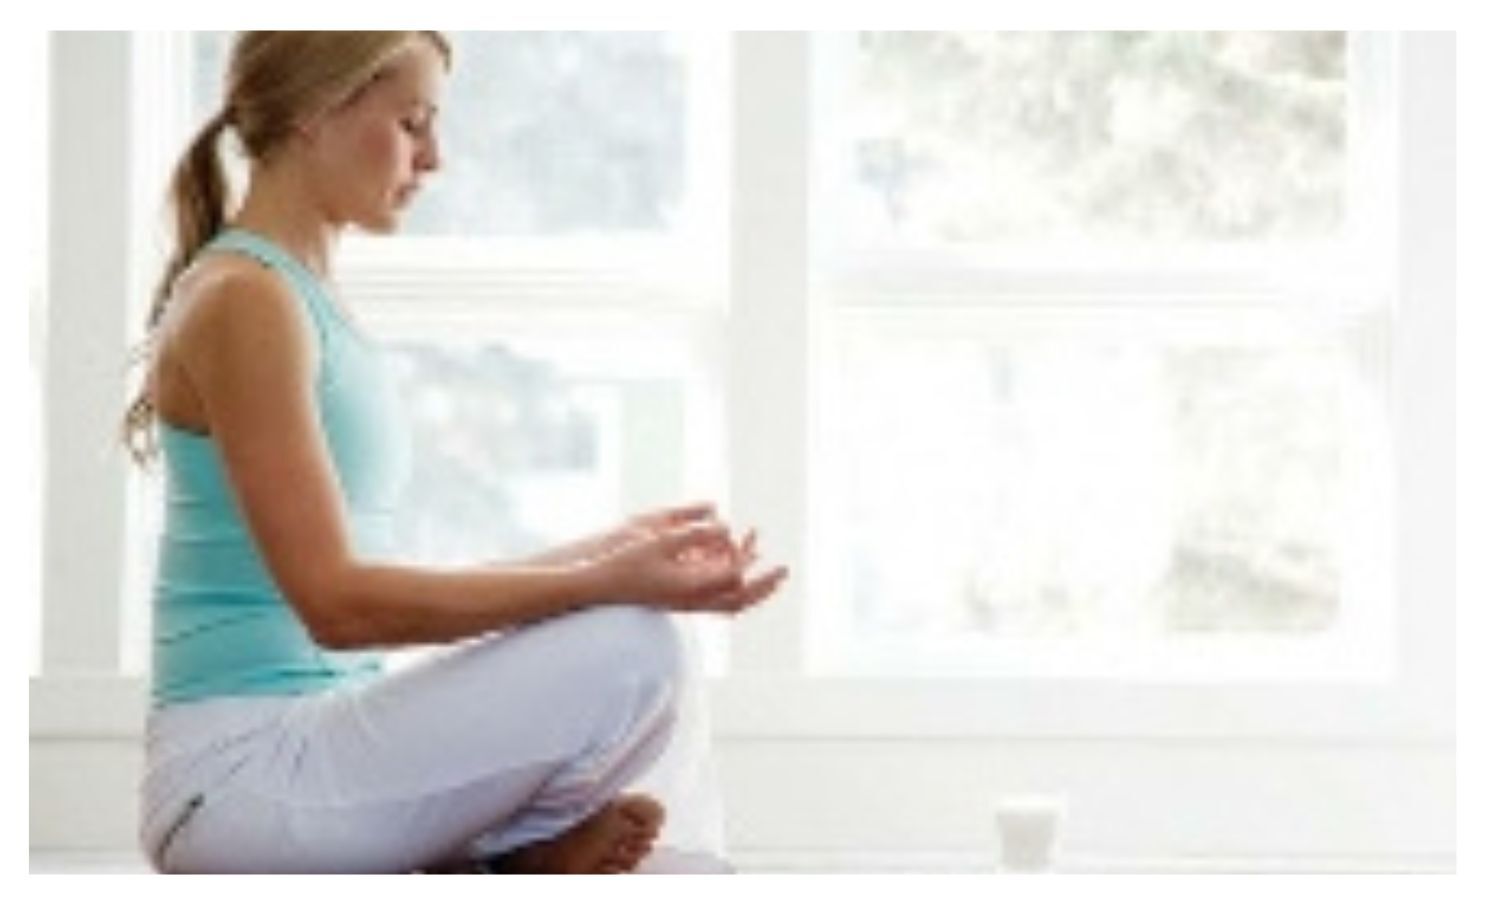 Meditation Benefits: Meditation helps children deal with stress, there are other health benefits